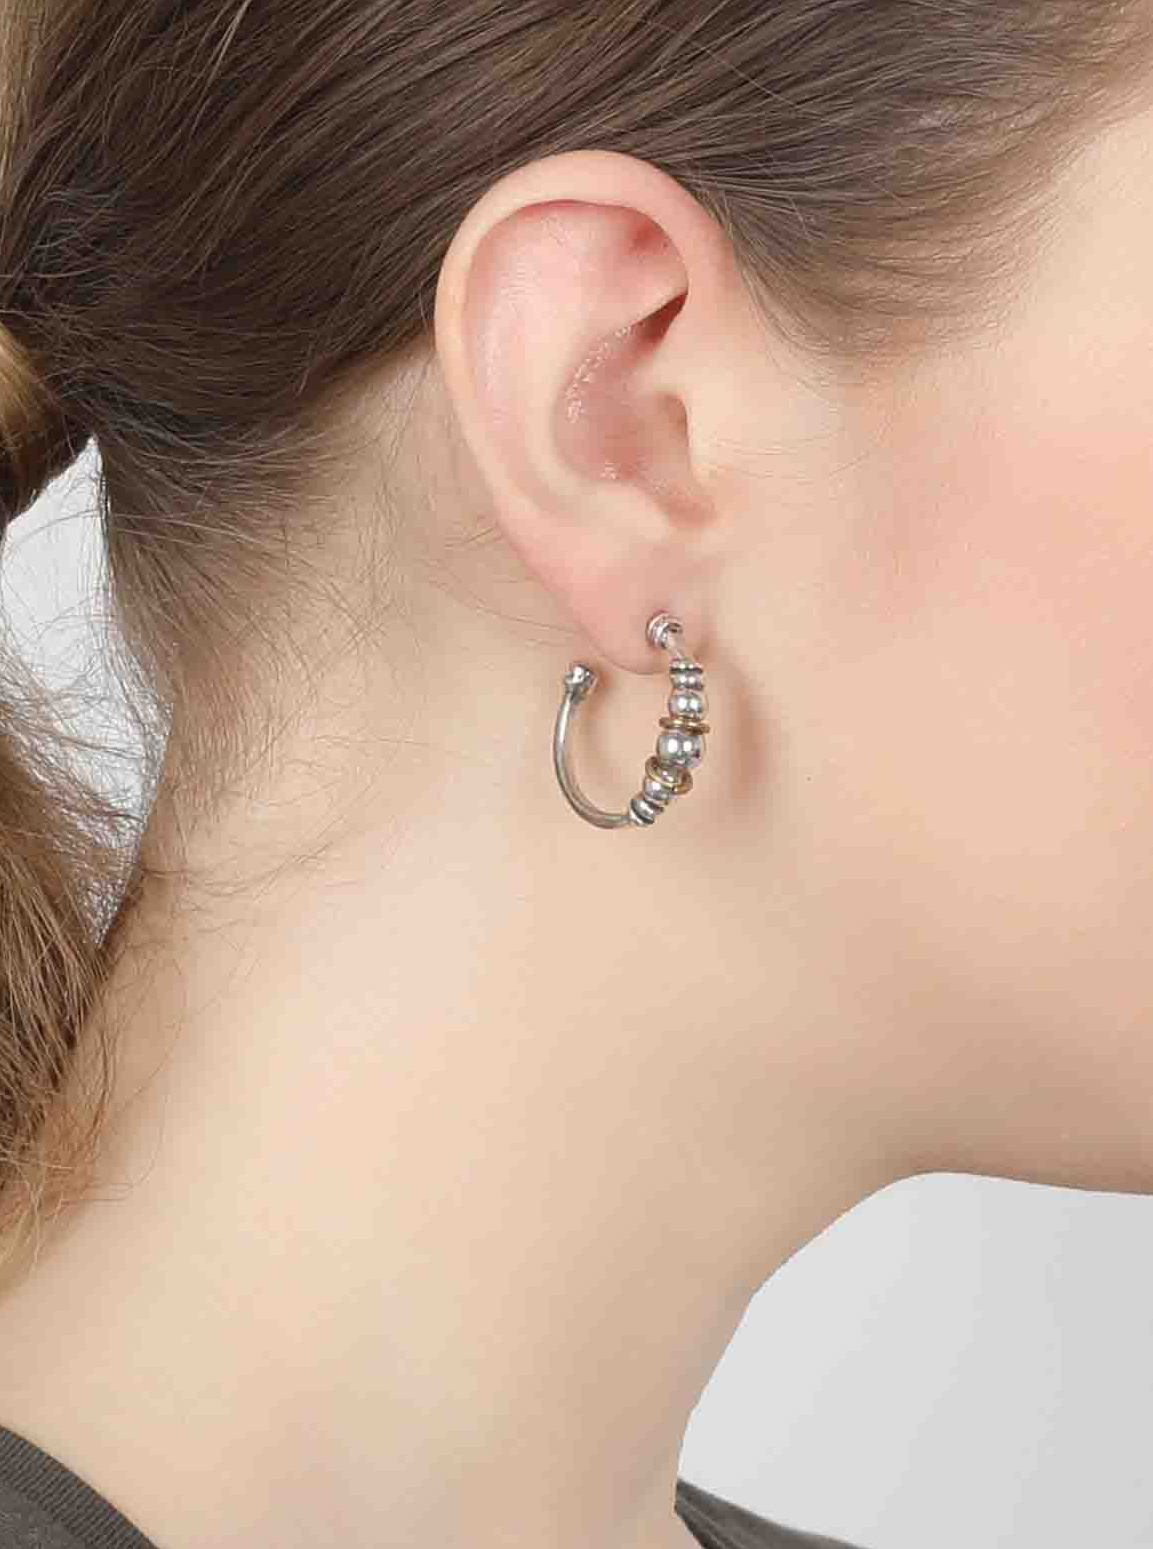 Ori Tao Sparkling Small Creoles - Exquisite French Earrings